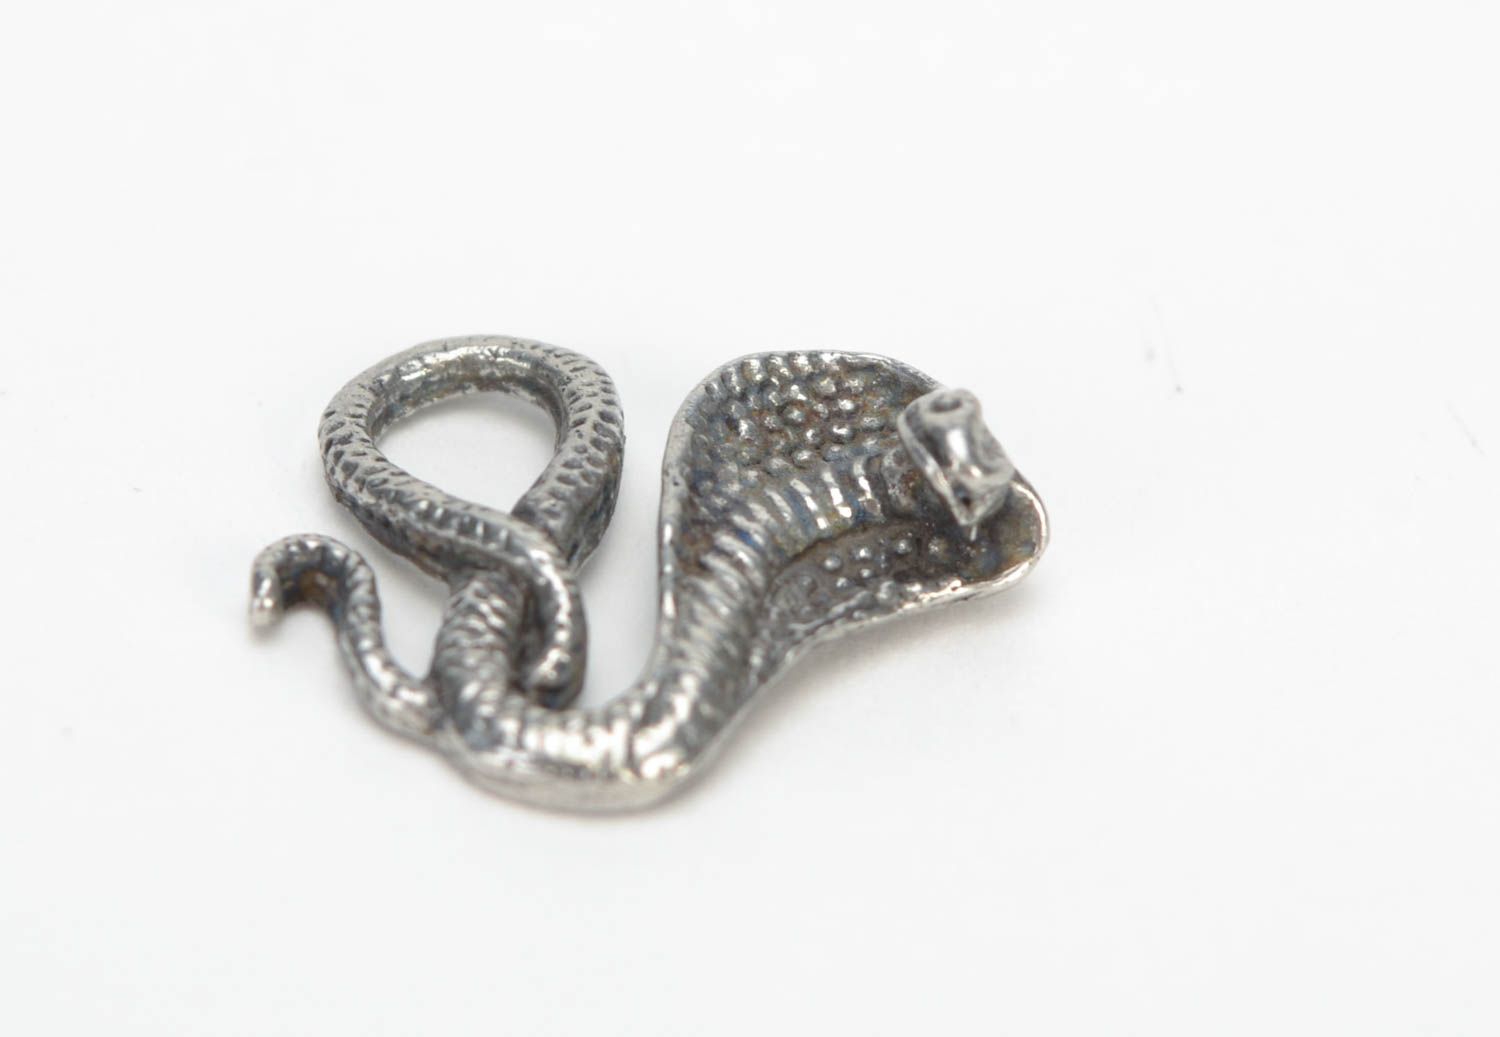 Beautiful metal craft blank pendant in the shape of snake jewelry making ideas photo 2